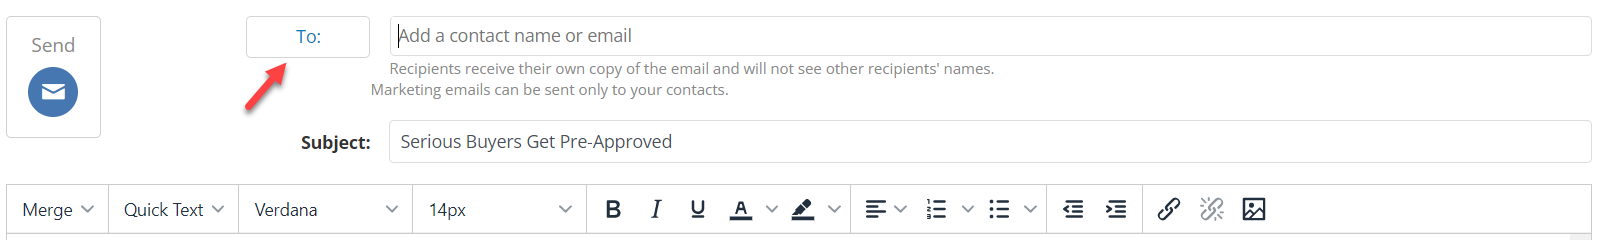 Screenshot showing the "To" button to select contacts for email